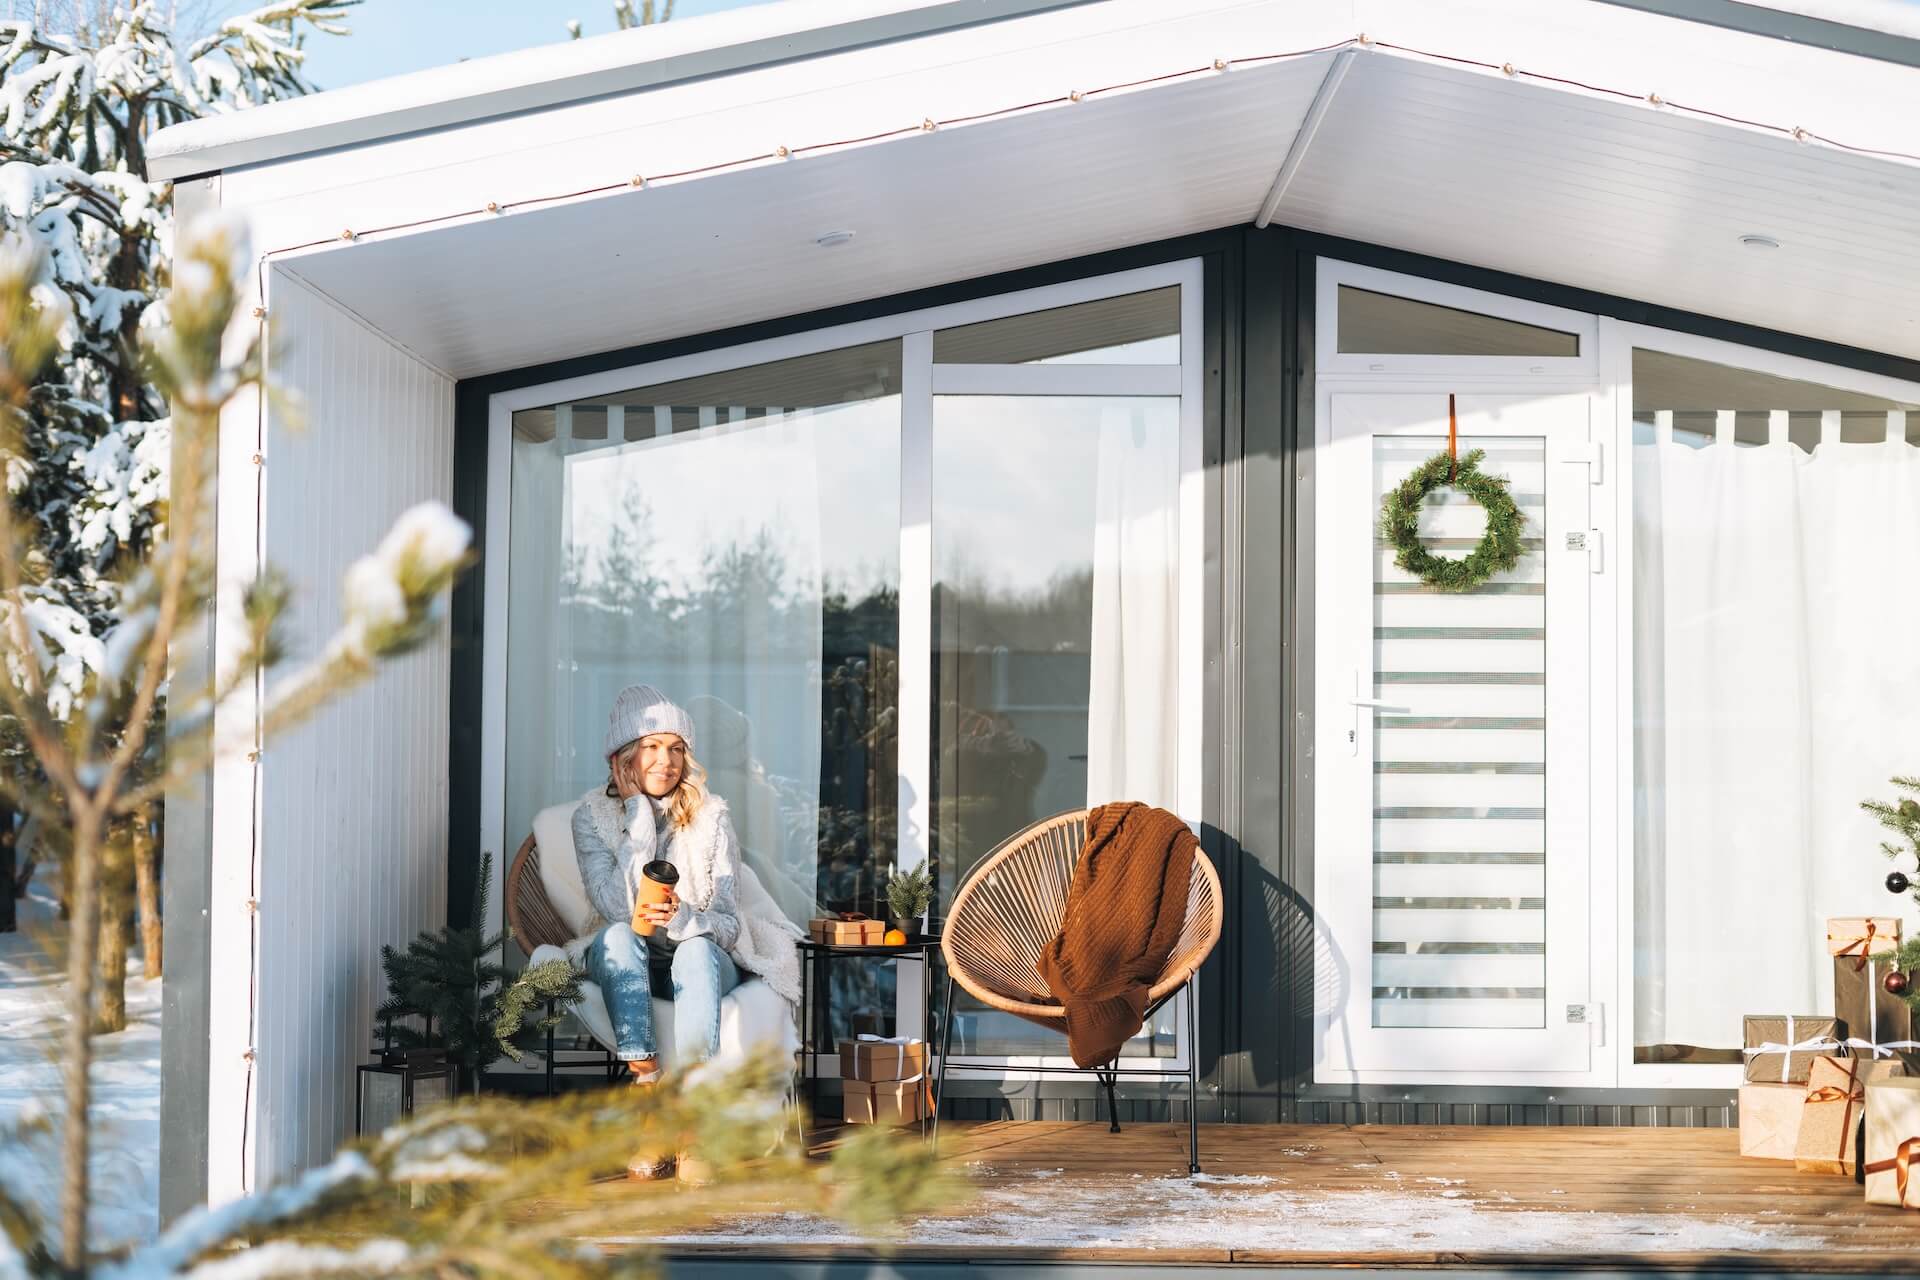 Woman sitting with a coffee cup in front of house built and designed with modern Scandinavian architecture | Featured image for the Modern Scandinavian Architecture Blog by Clements Clarke Architects.